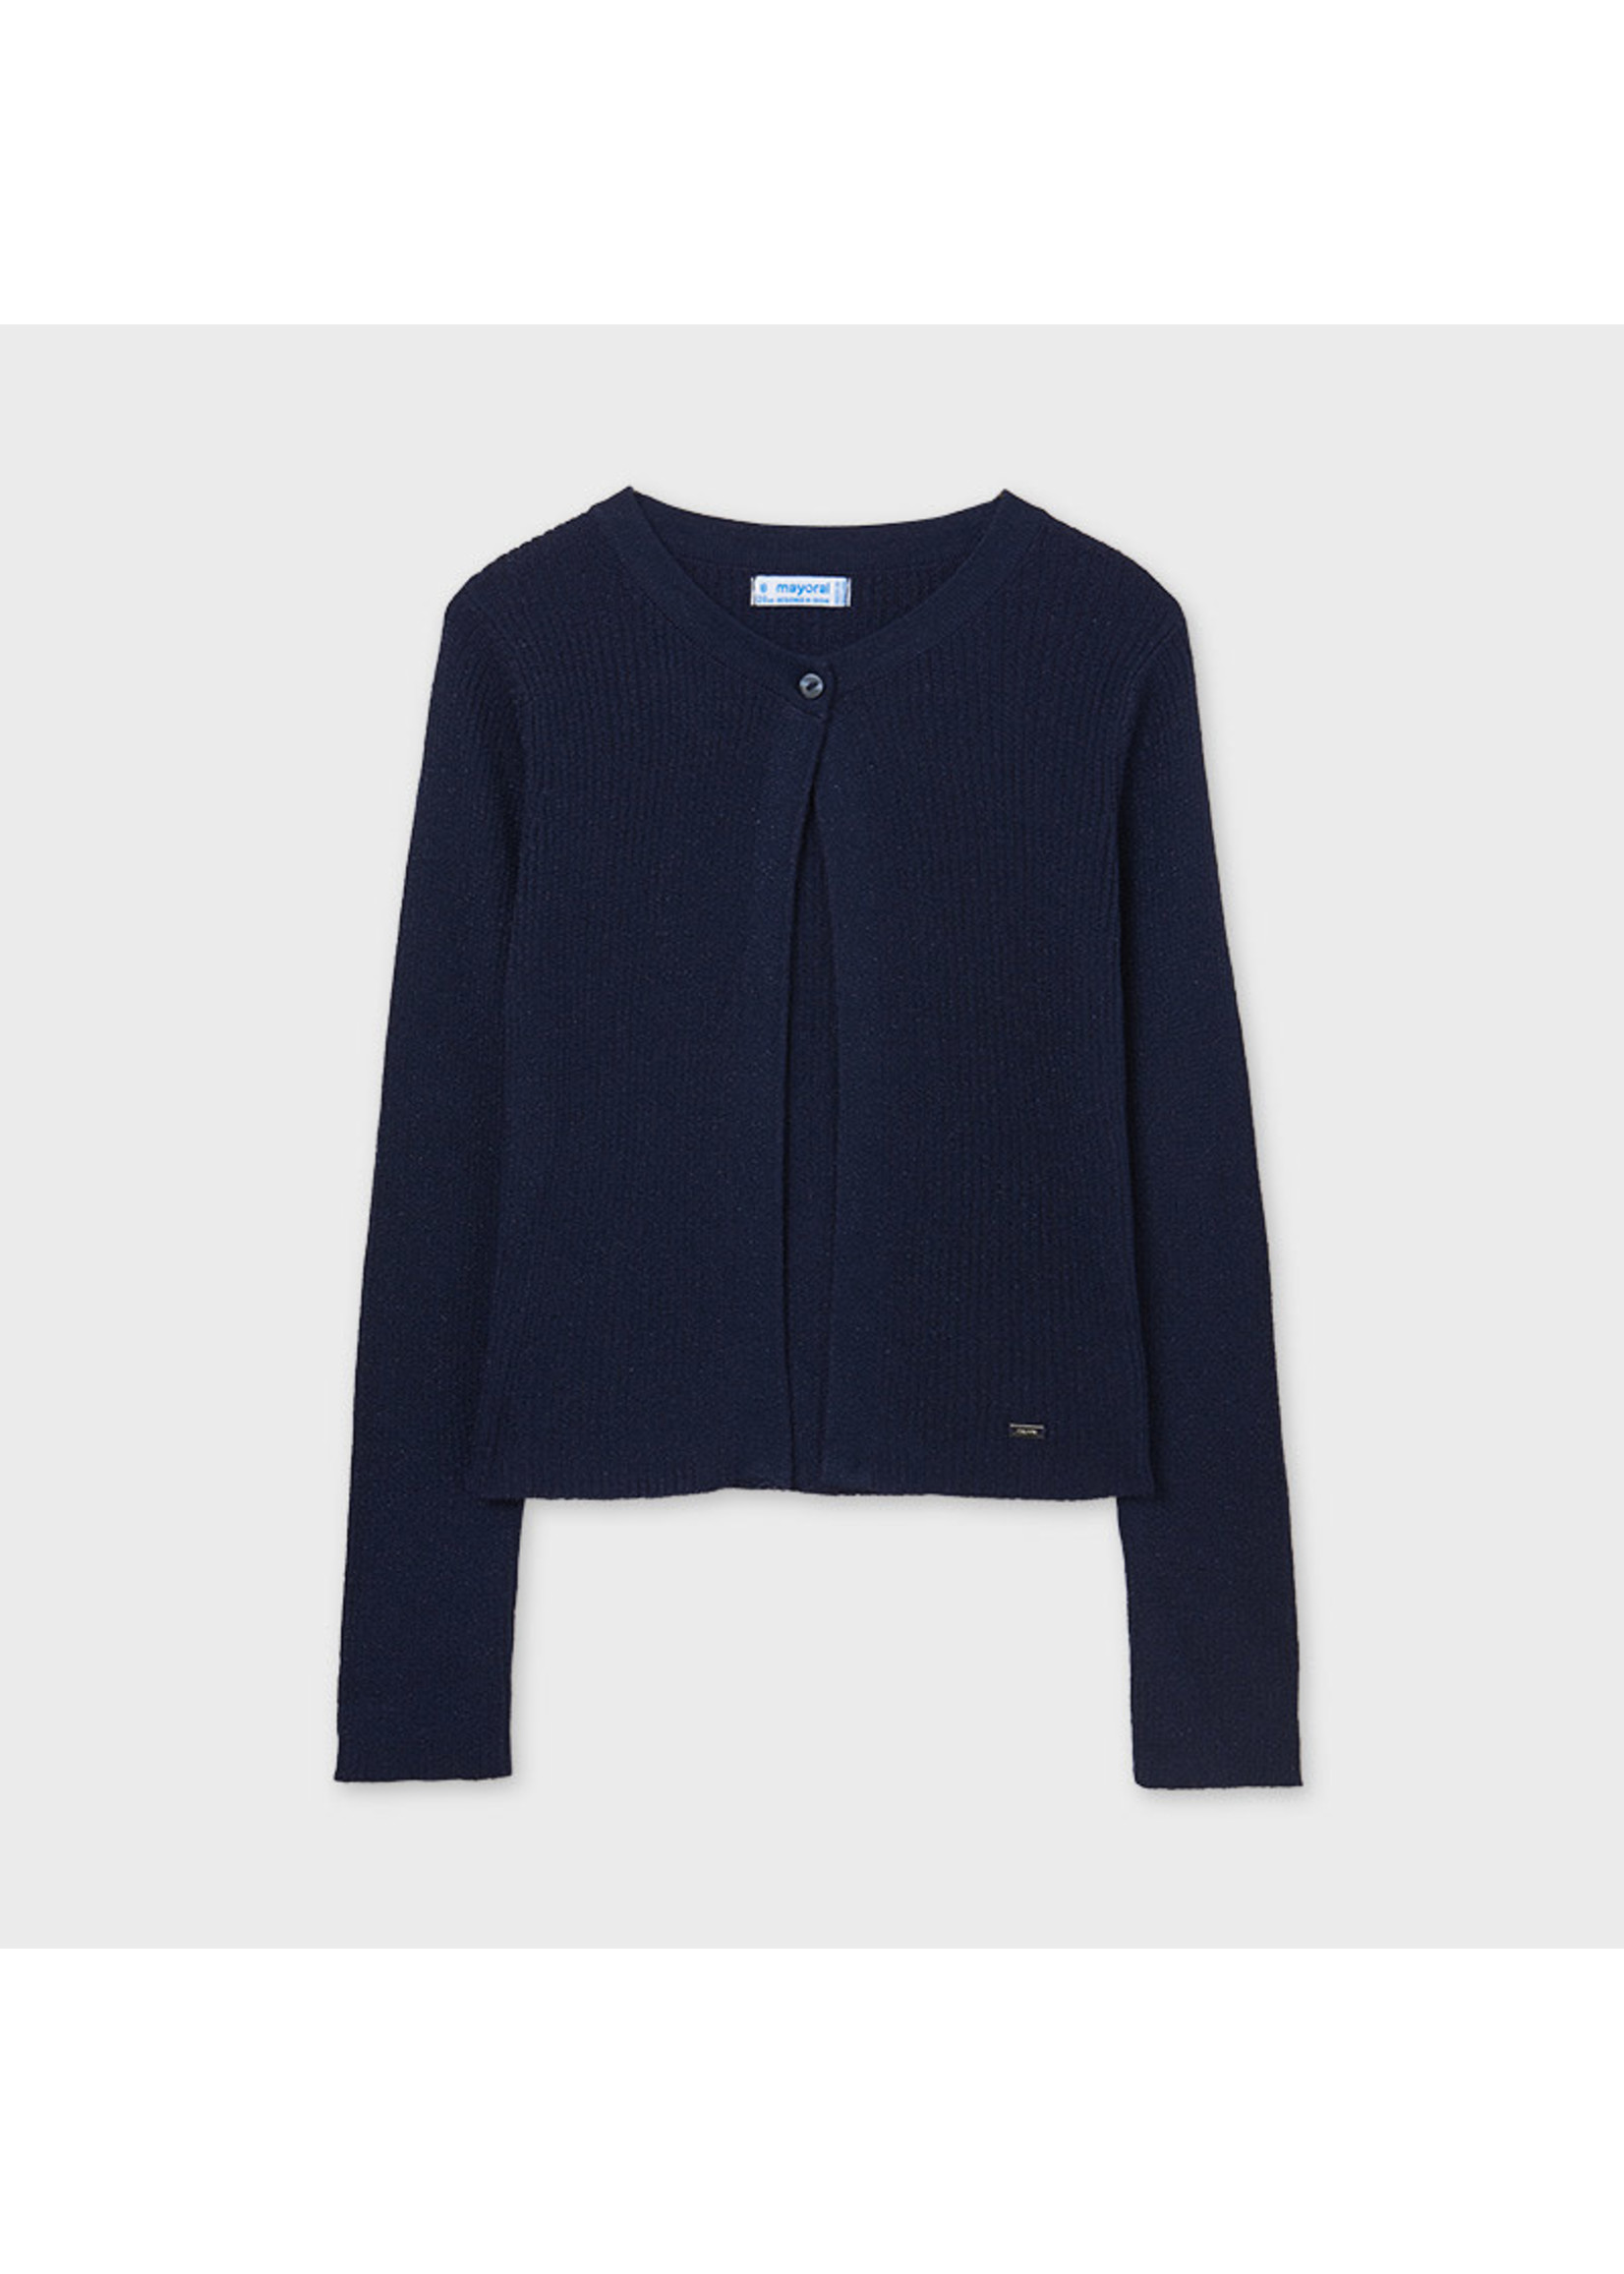 Mayoral Mayoral Knitted cardigan Navy - 21 06320